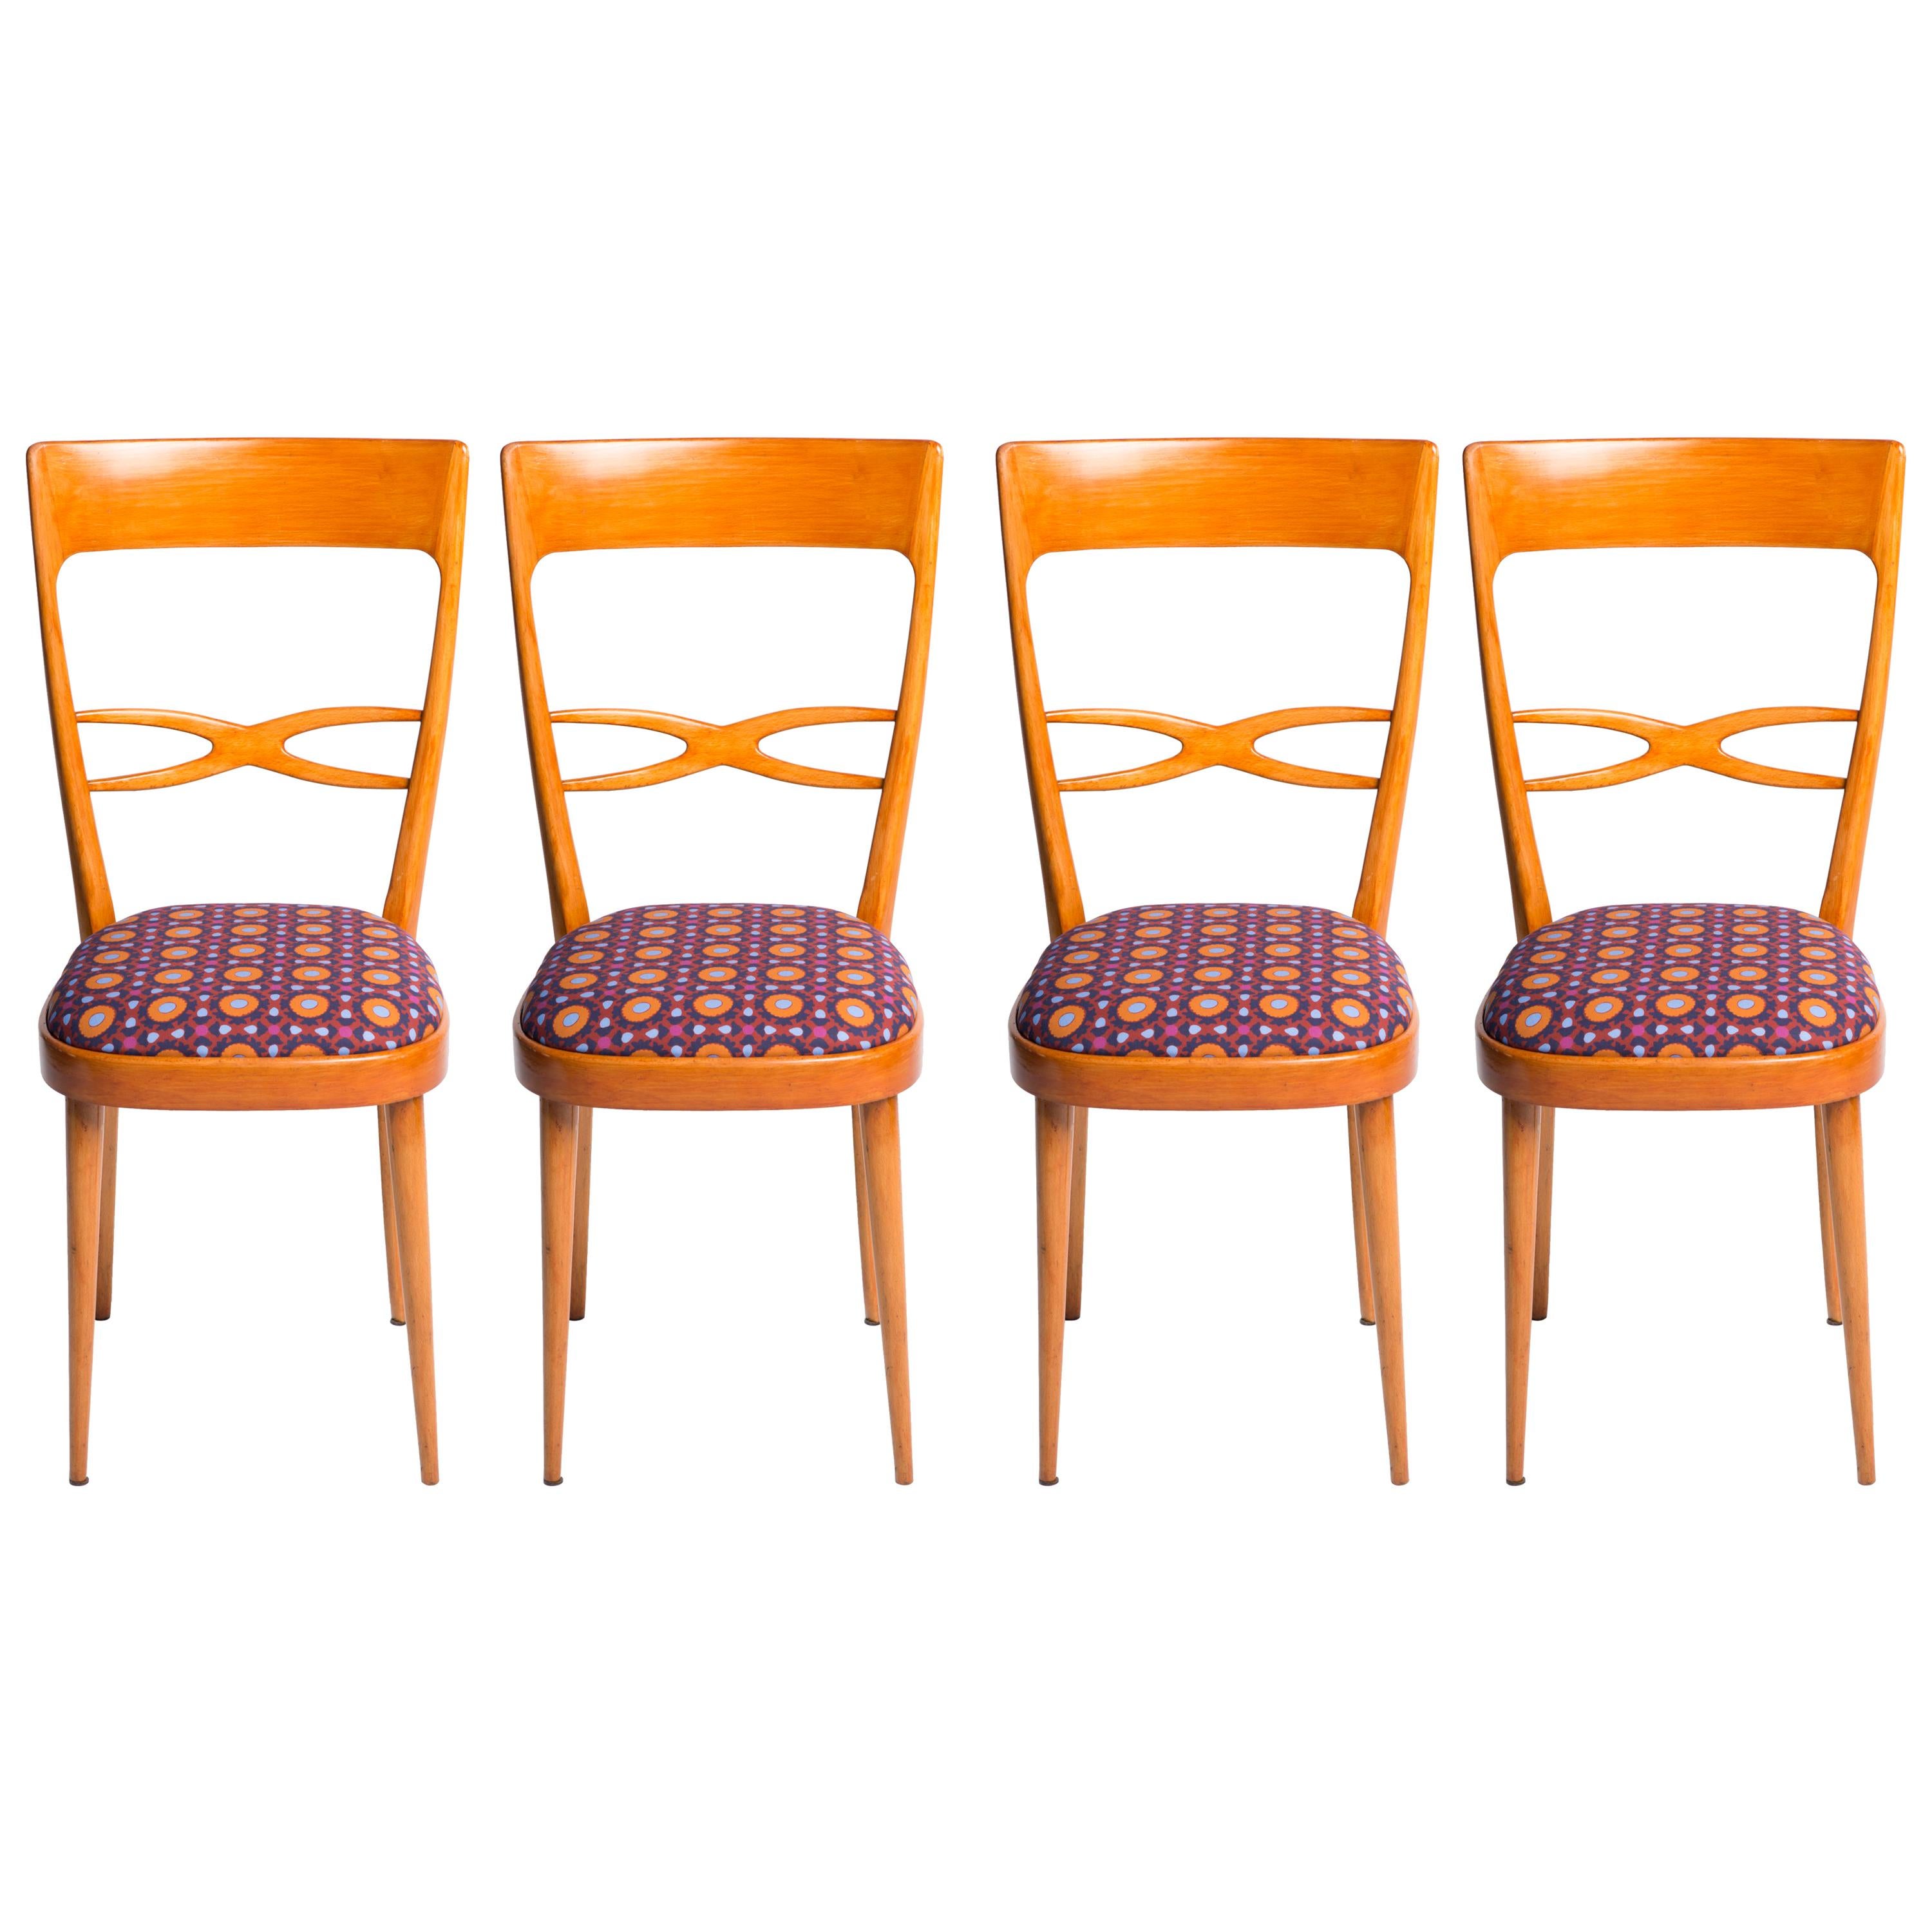 Set of Six 1950s Italian Chairs Featuring Vintage Upholsteries by Ladoublej